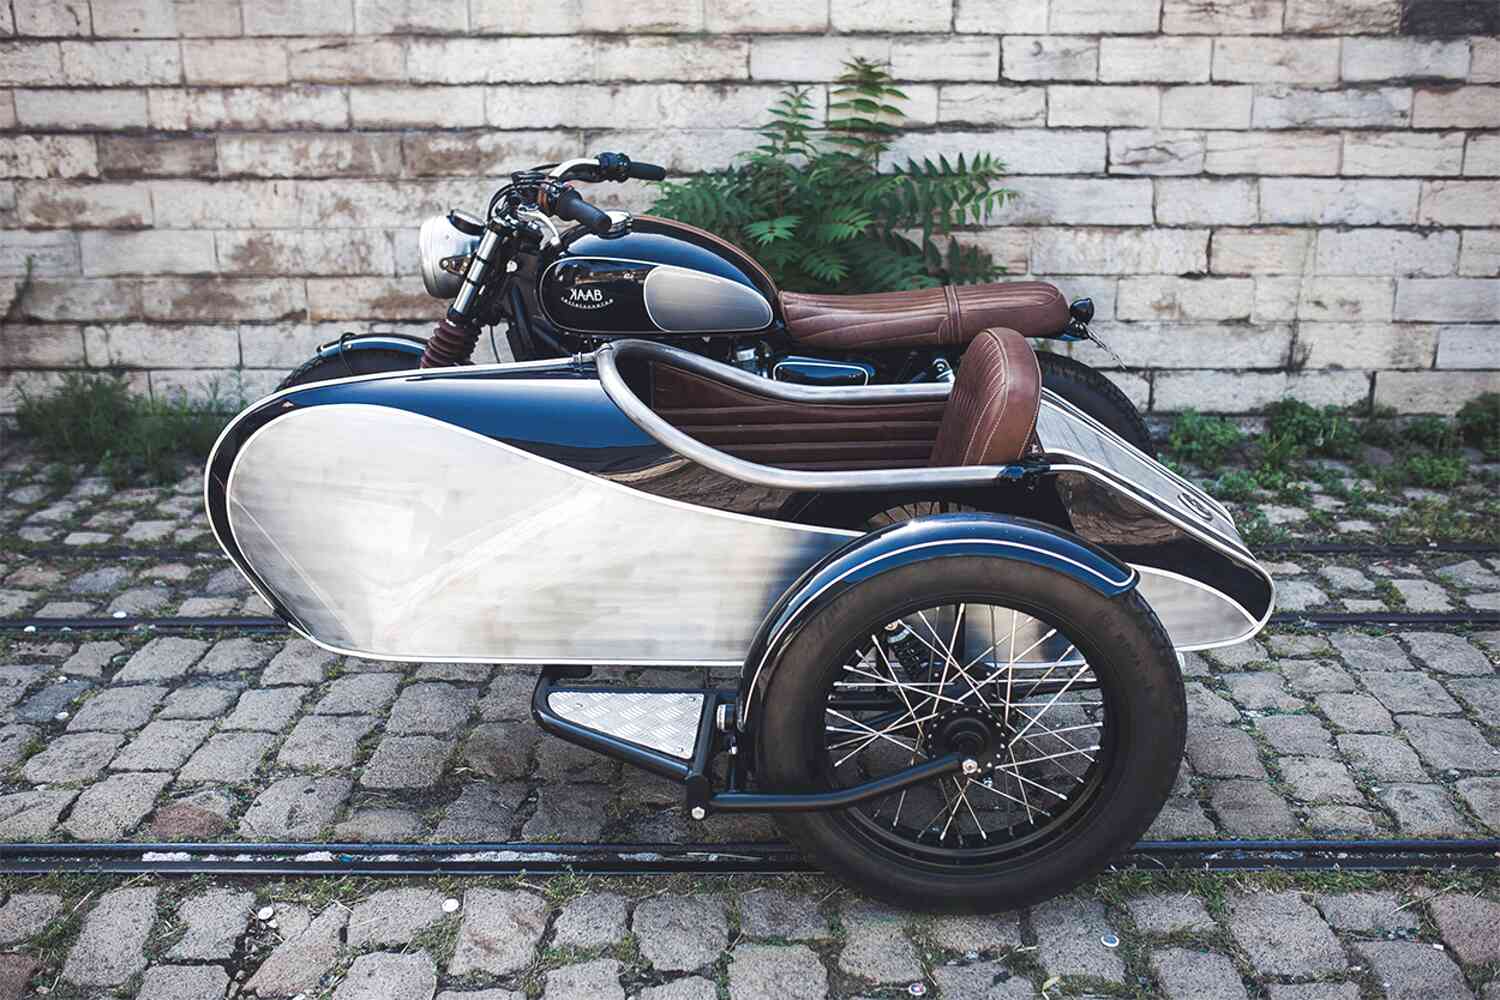 Triumph Sidecar for sale in UK 59 used Triumph Sidecars